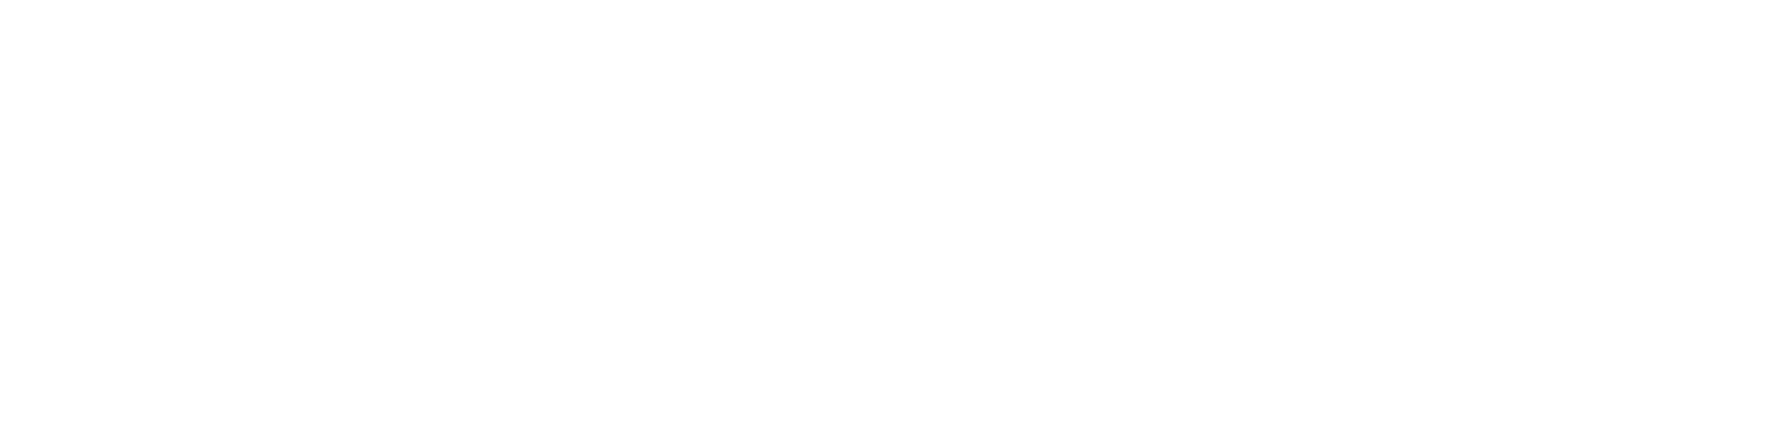 zpoint.png